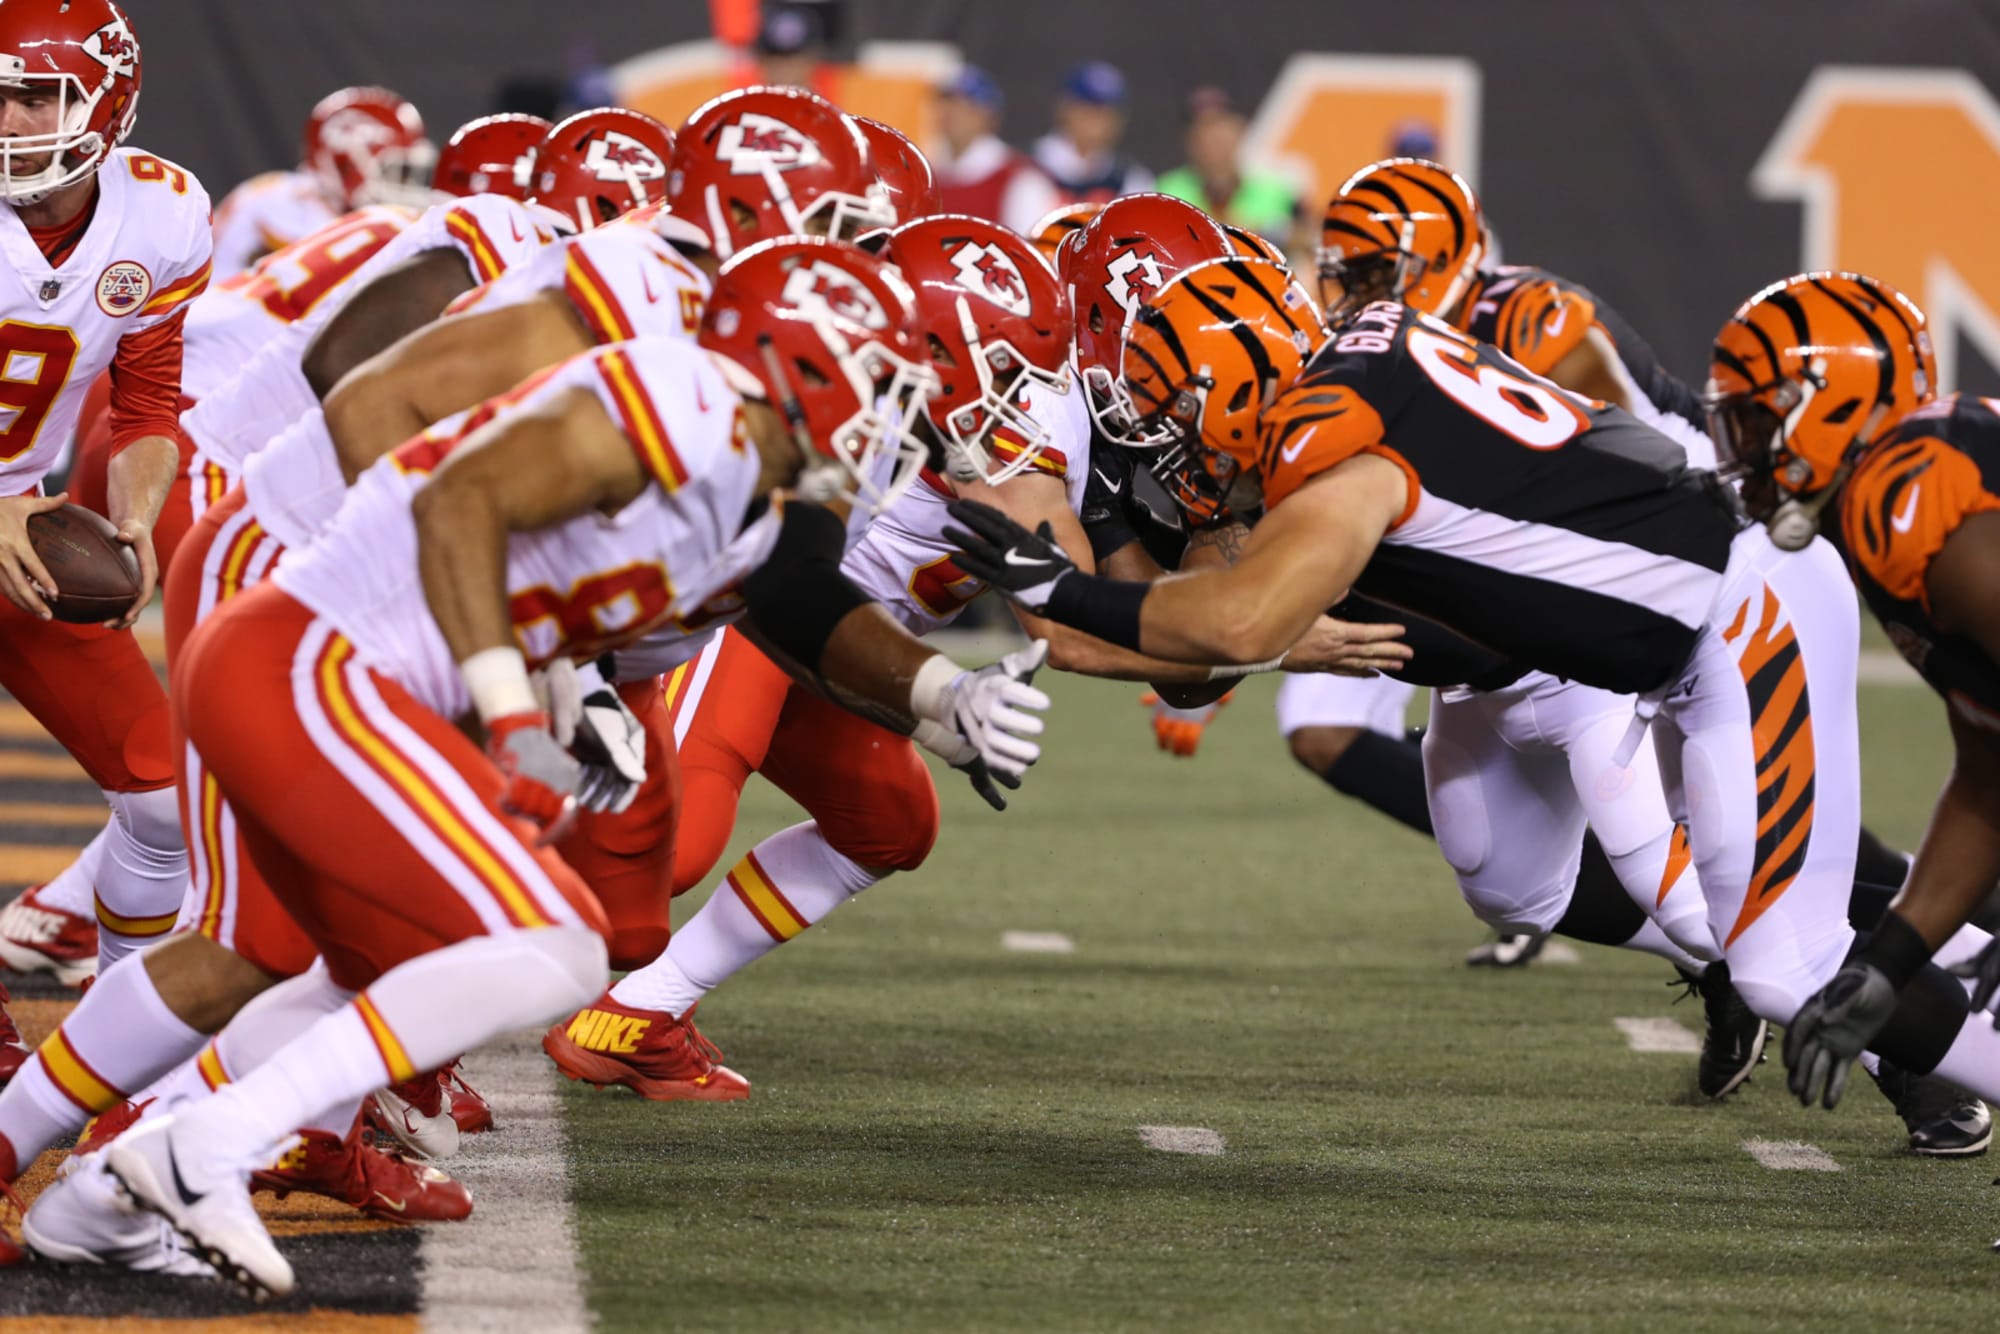 Kansas City Chiefs: Bengals have had Chiefs number over last decade